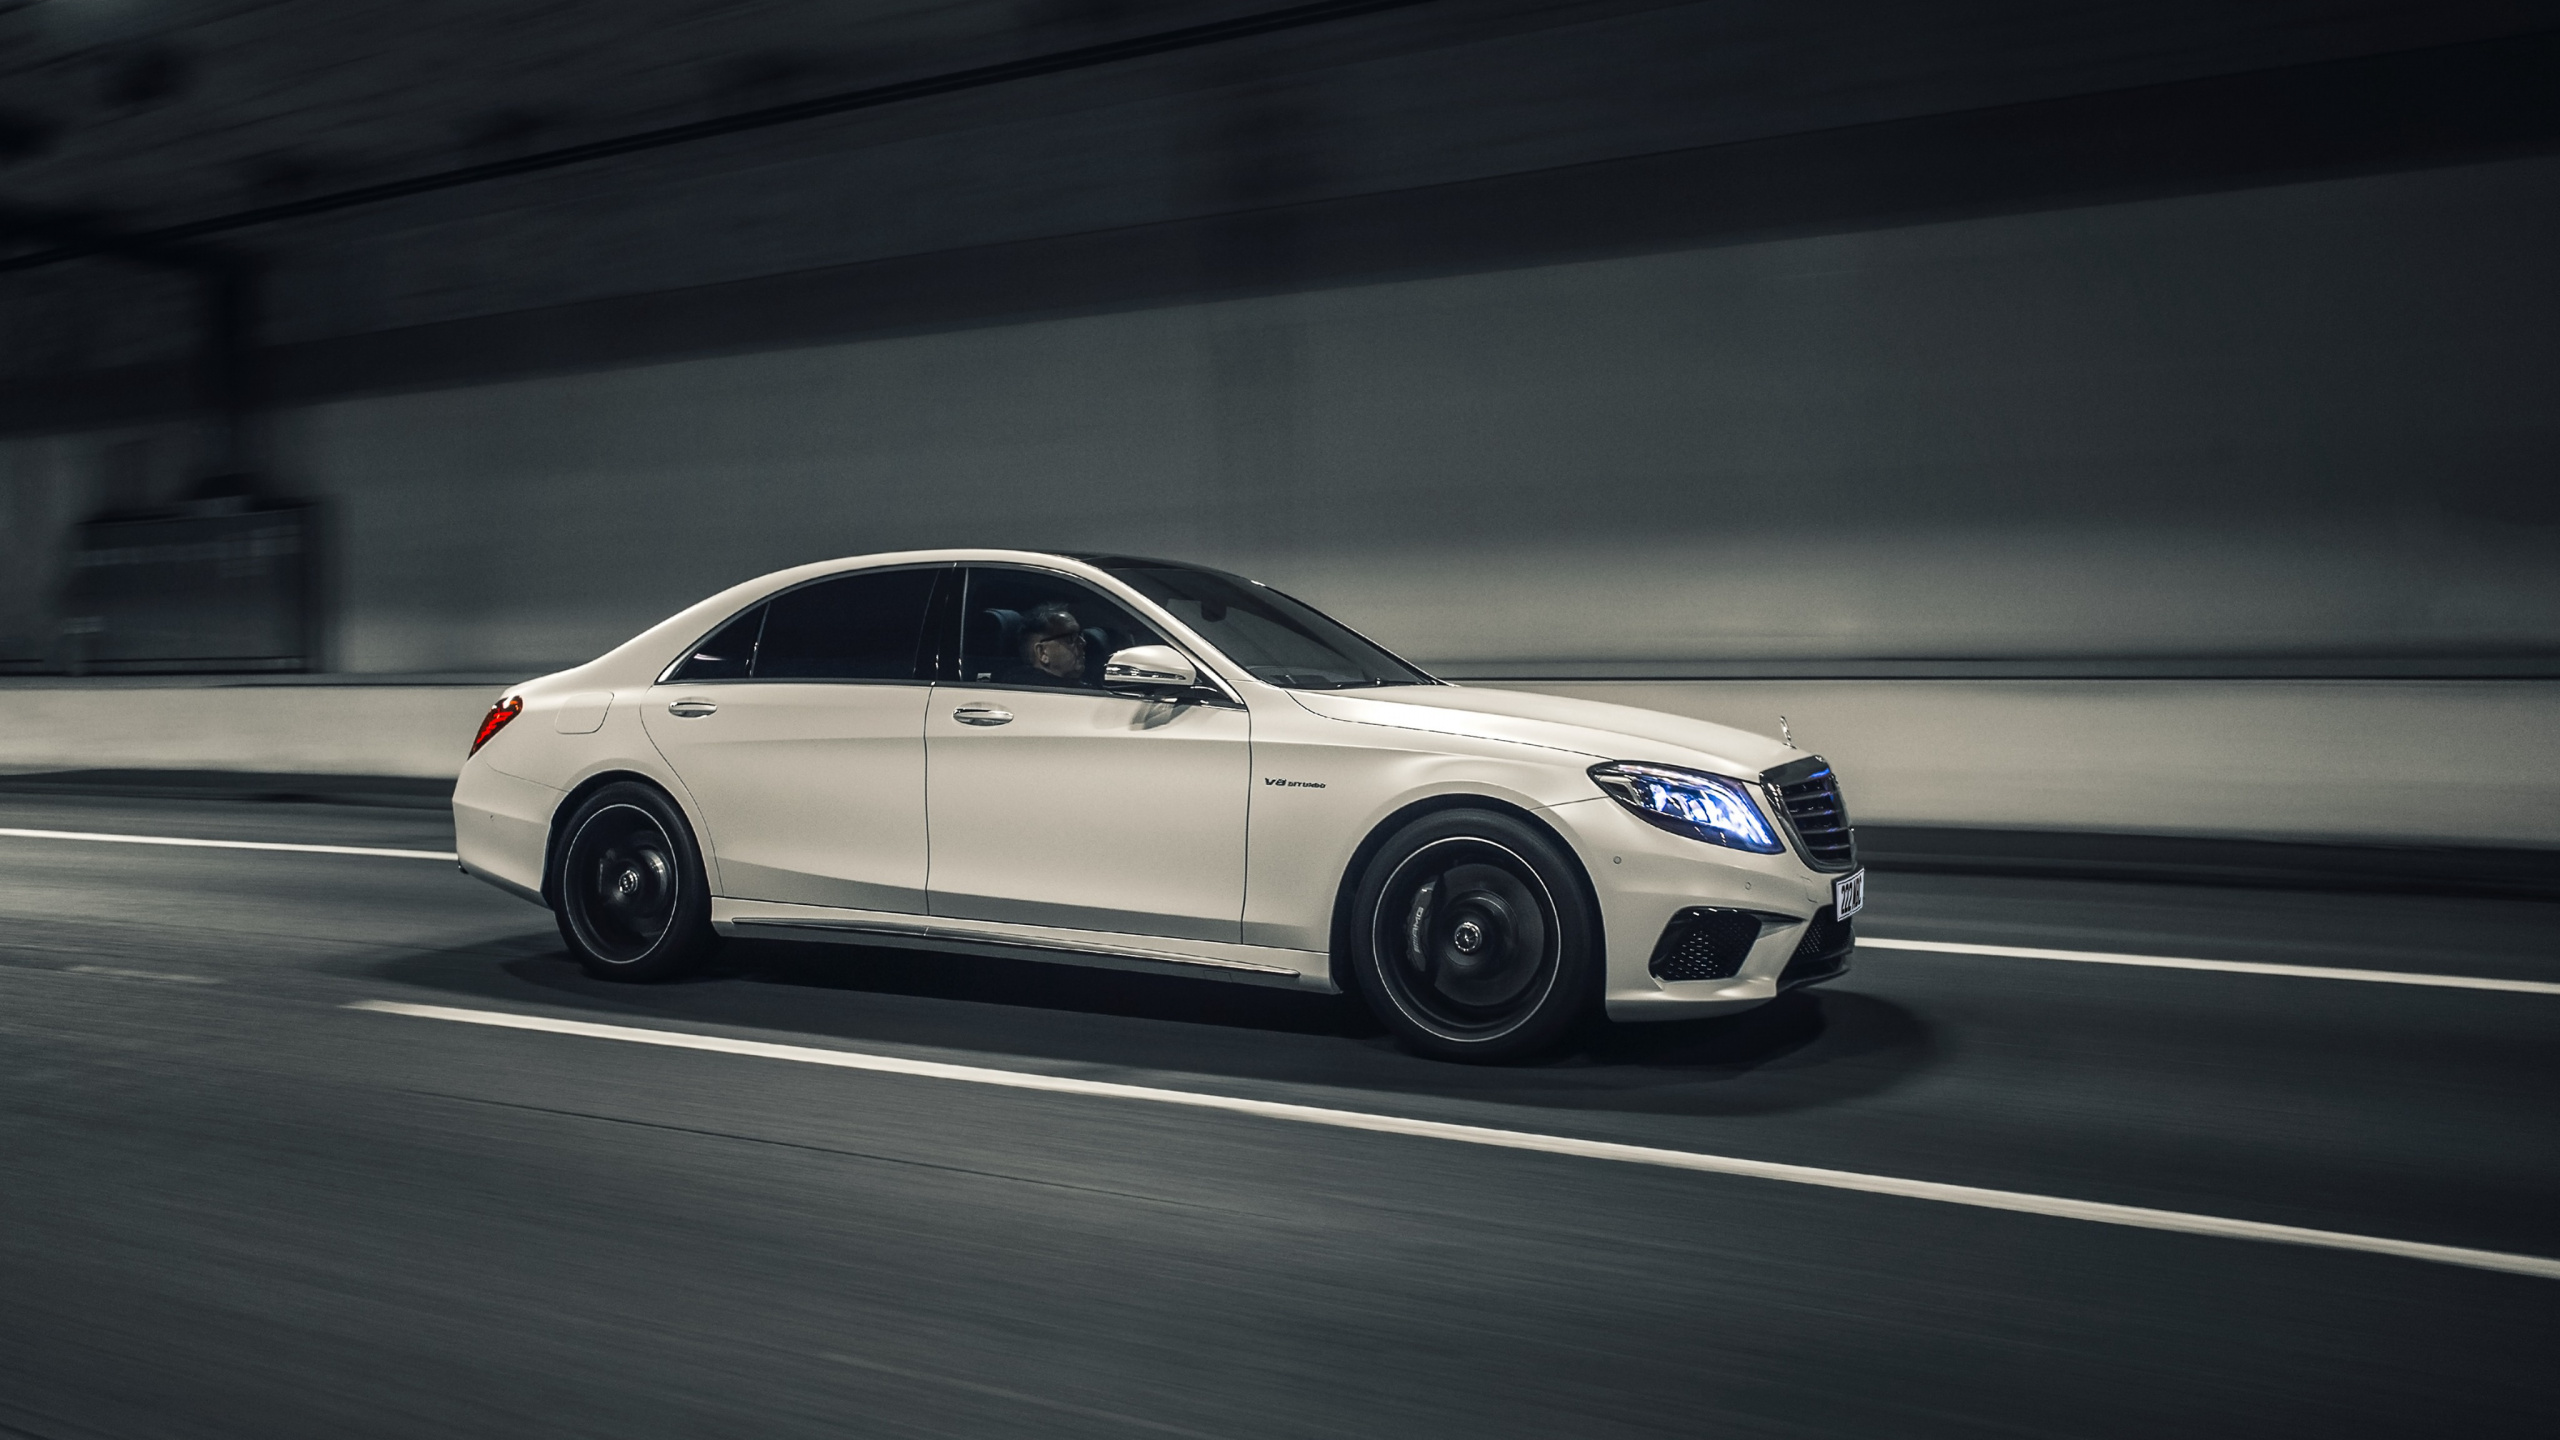 White Mercedes Benz Coupe on Road. Wallpaper in 2560x1440 Resolution